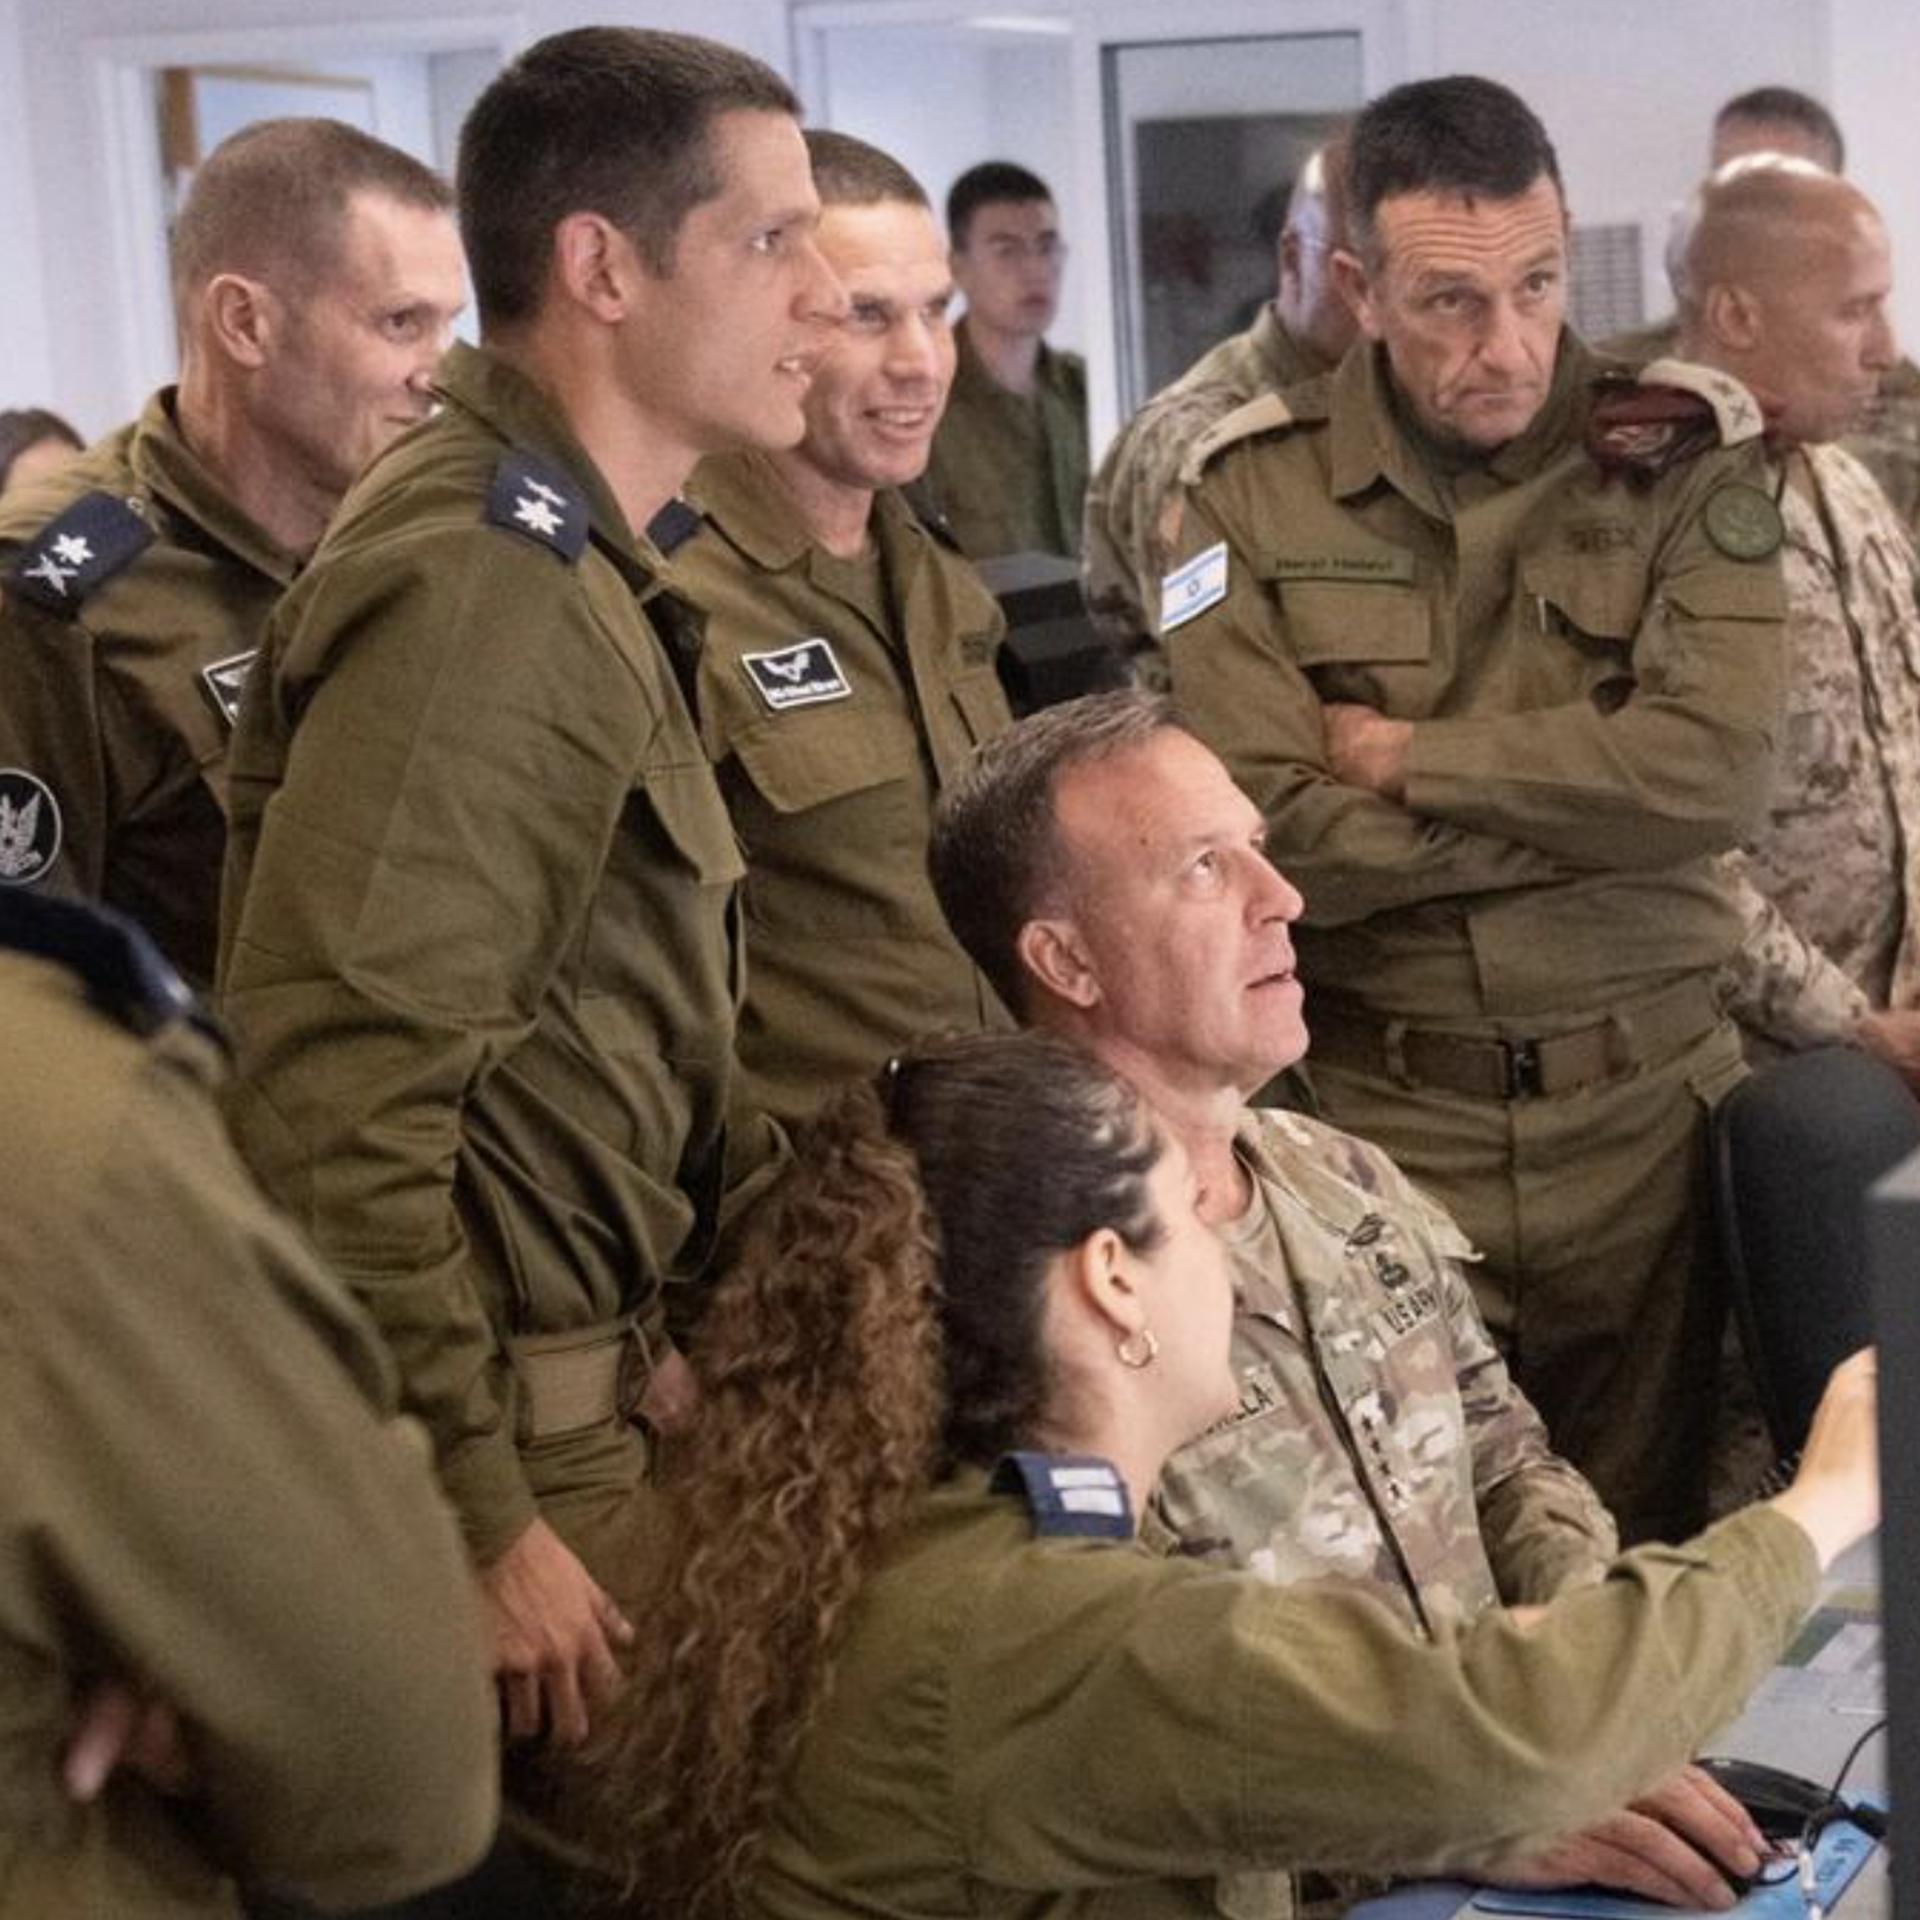 U.S. Gen. Michael Kurilla surrounded by Israeli soldiers in front of a computer.